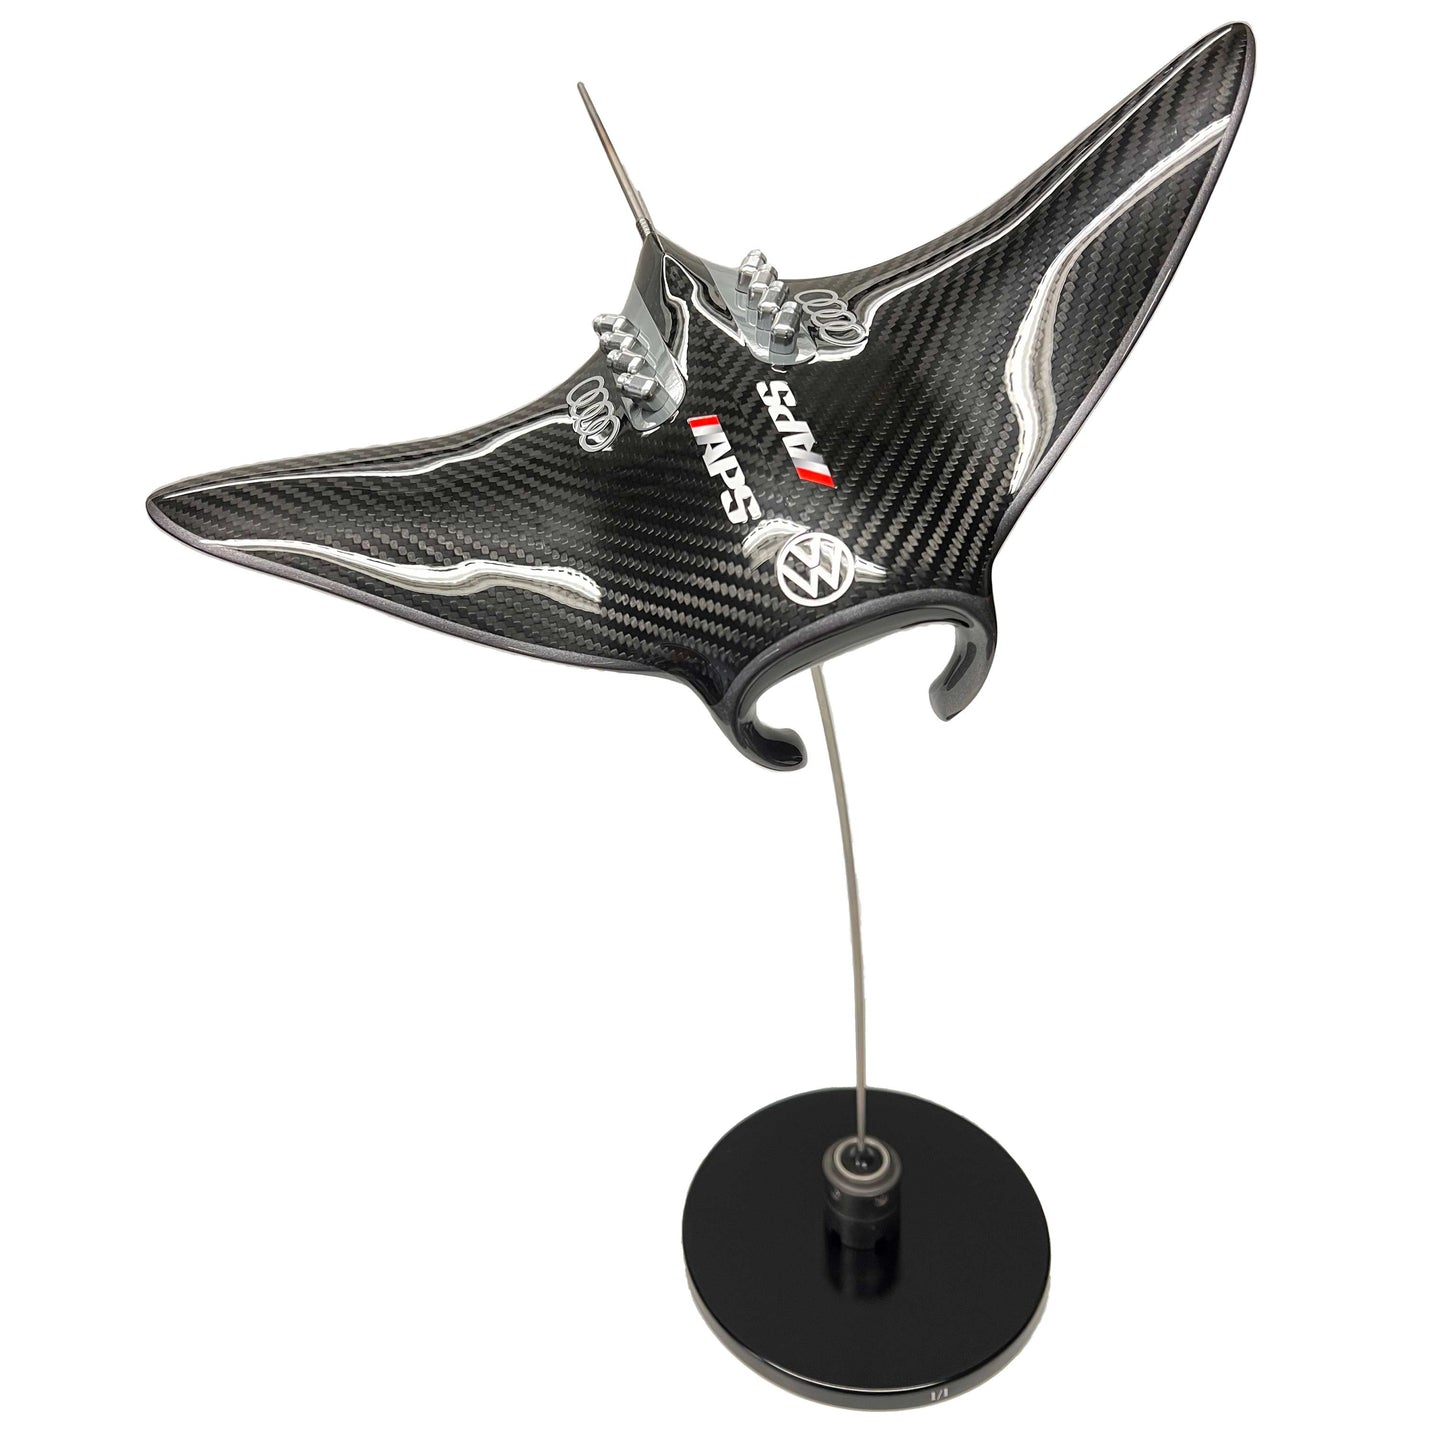 Carbon fibre manta ray sculpture with custom APS livery on a black base and F1 part